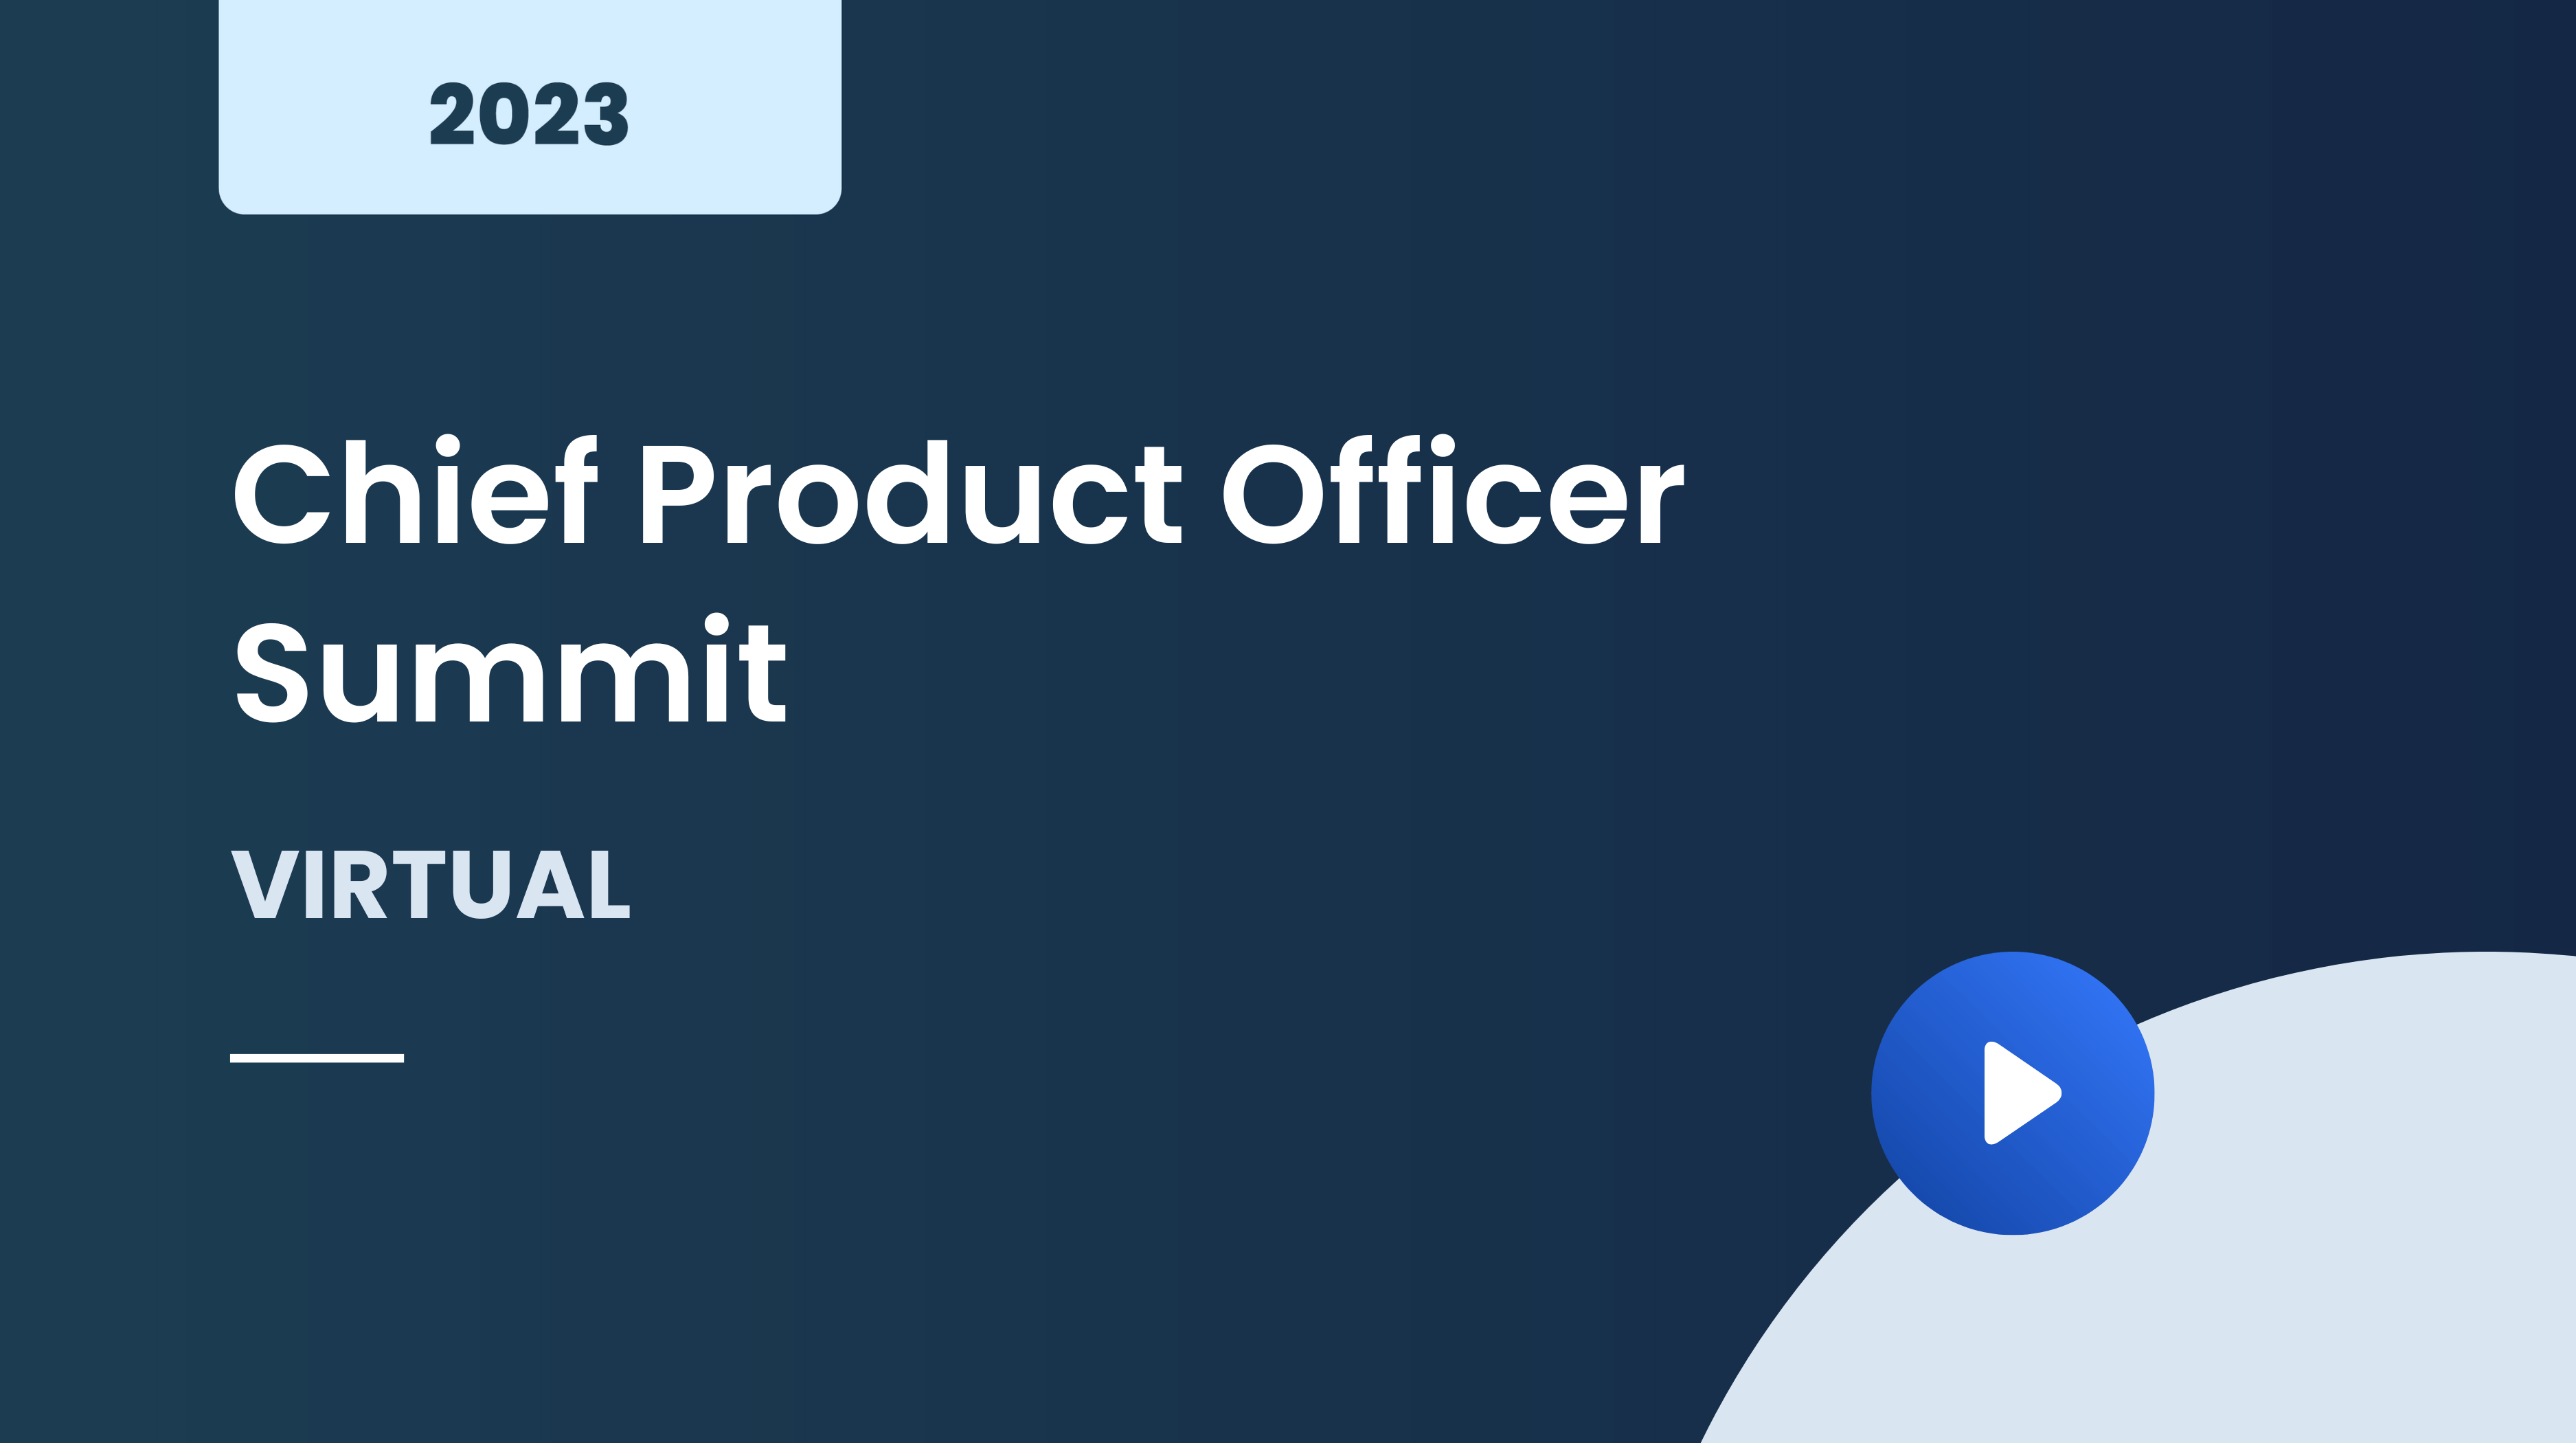 Chief Product Officer Summit November 2023